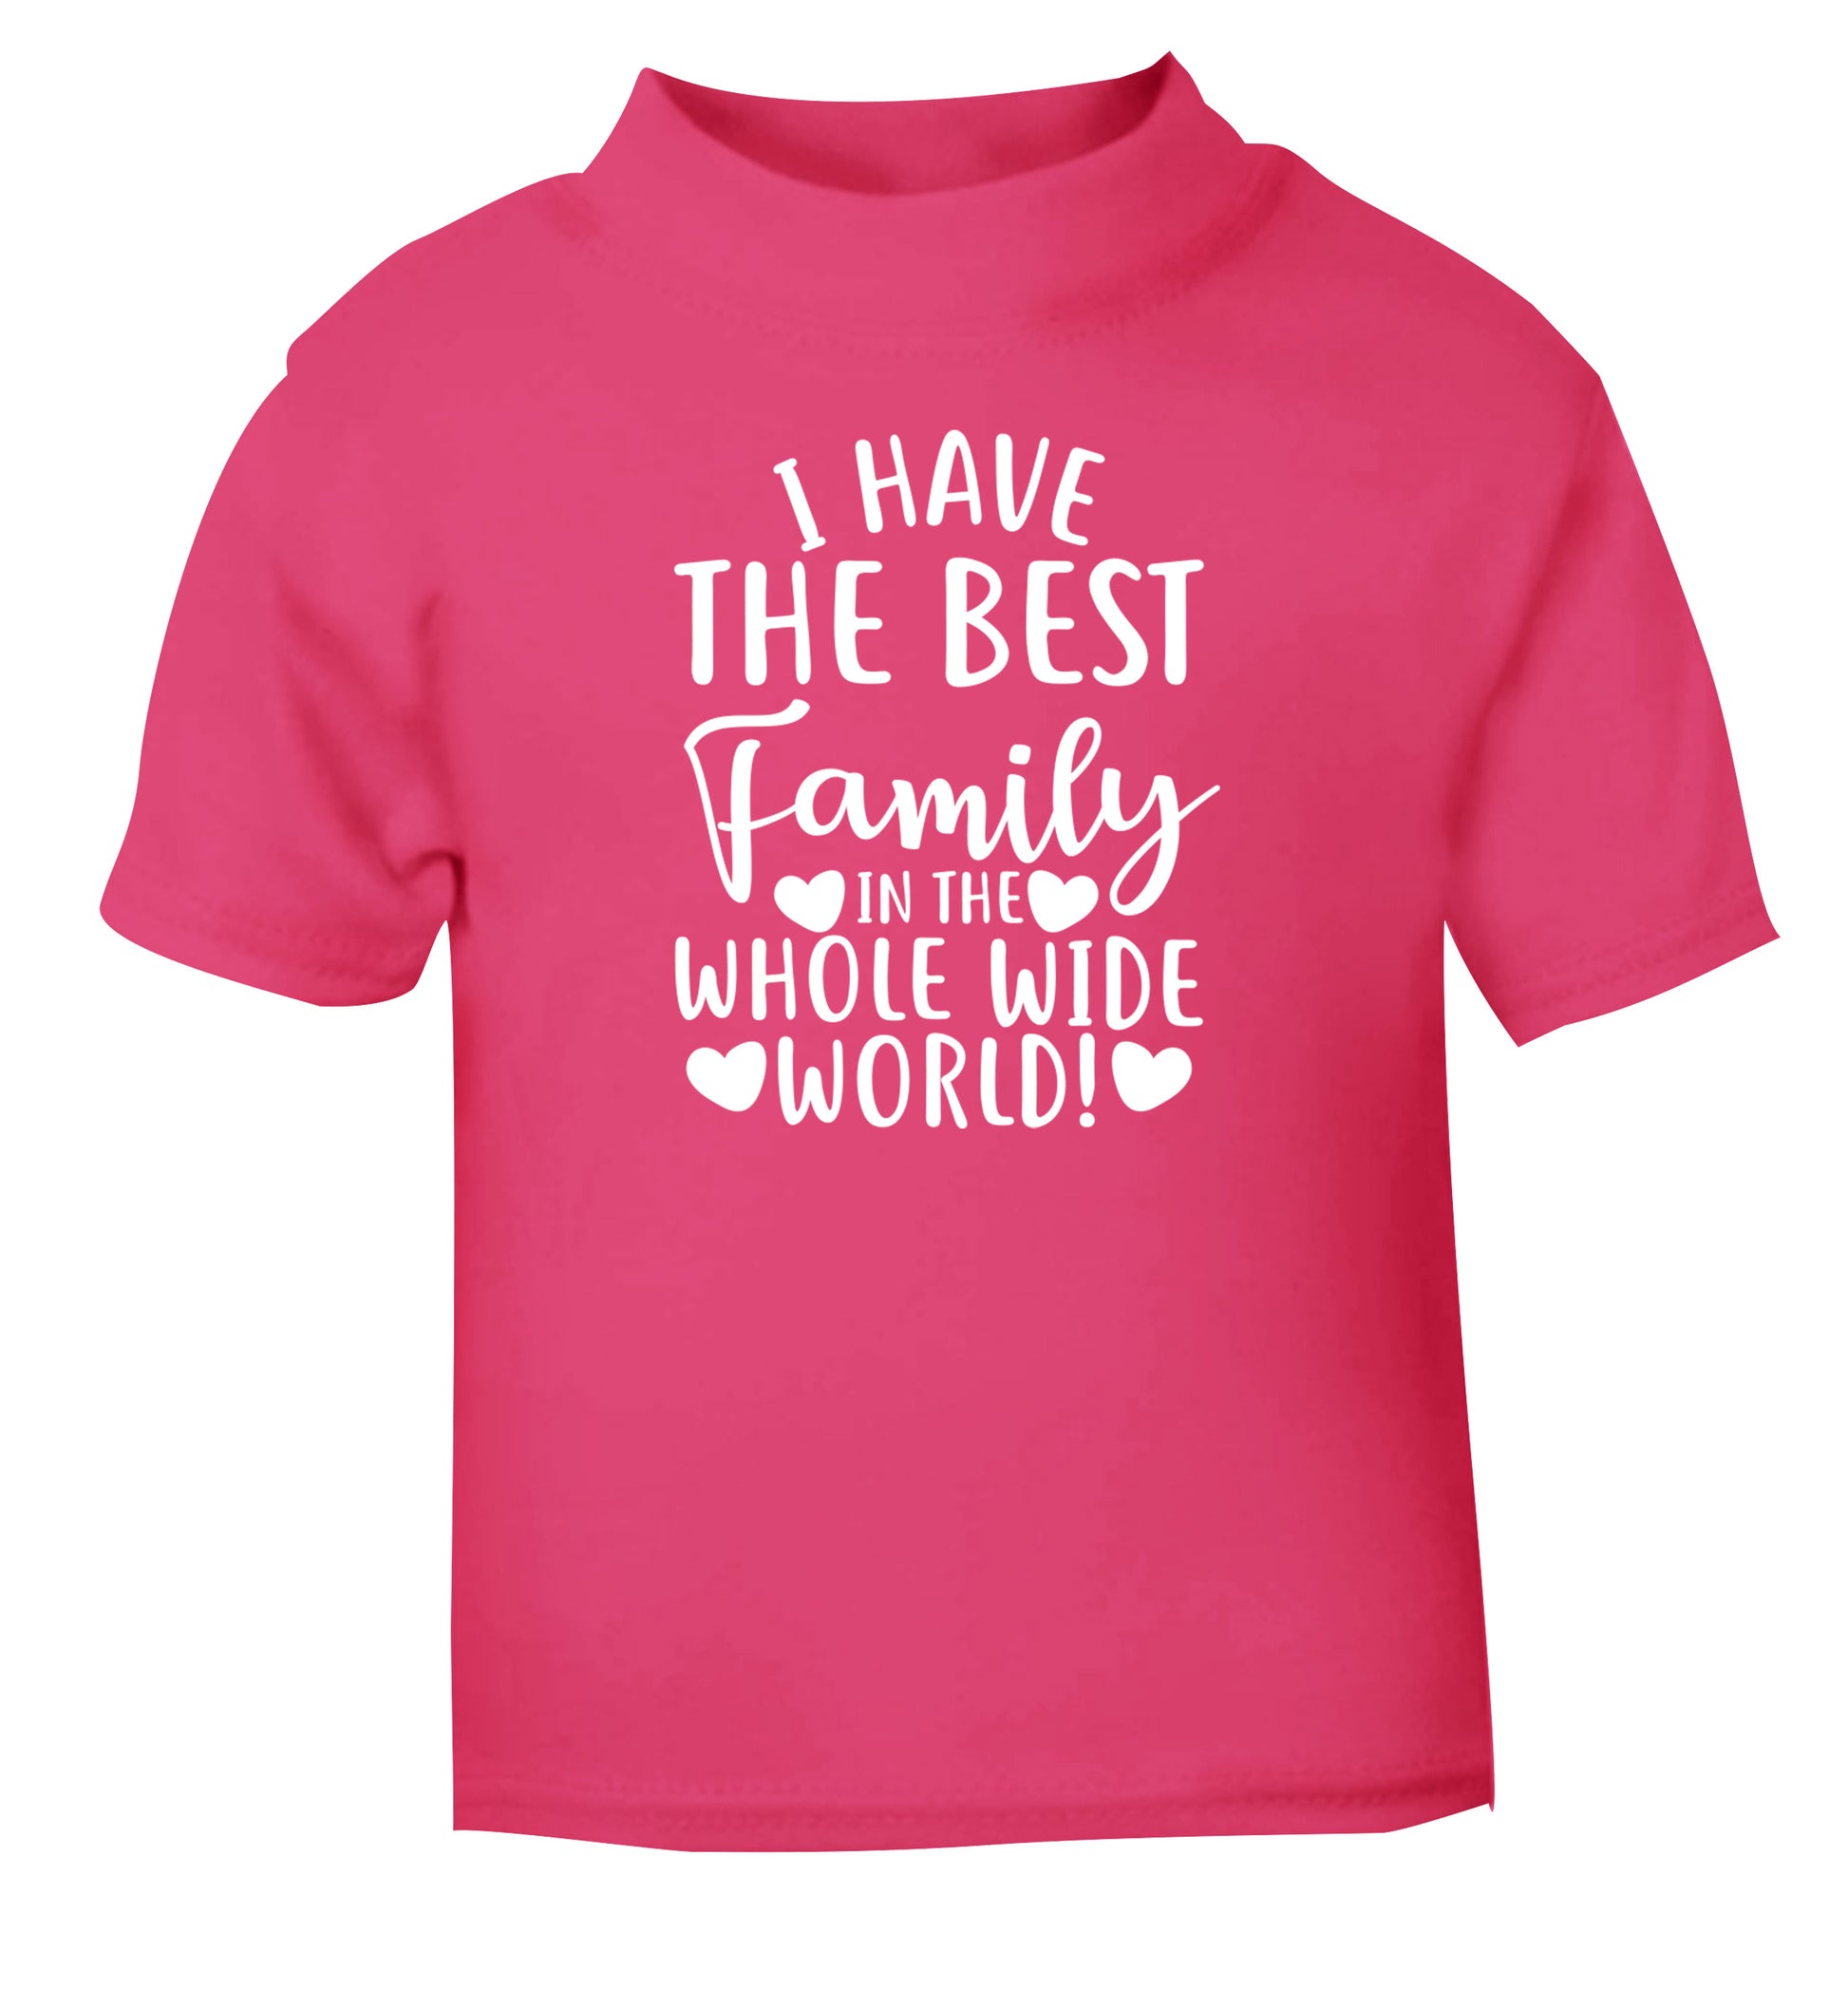 I have the best family in the whole wide world! pink Baby Toddler Tshirt 2 Years